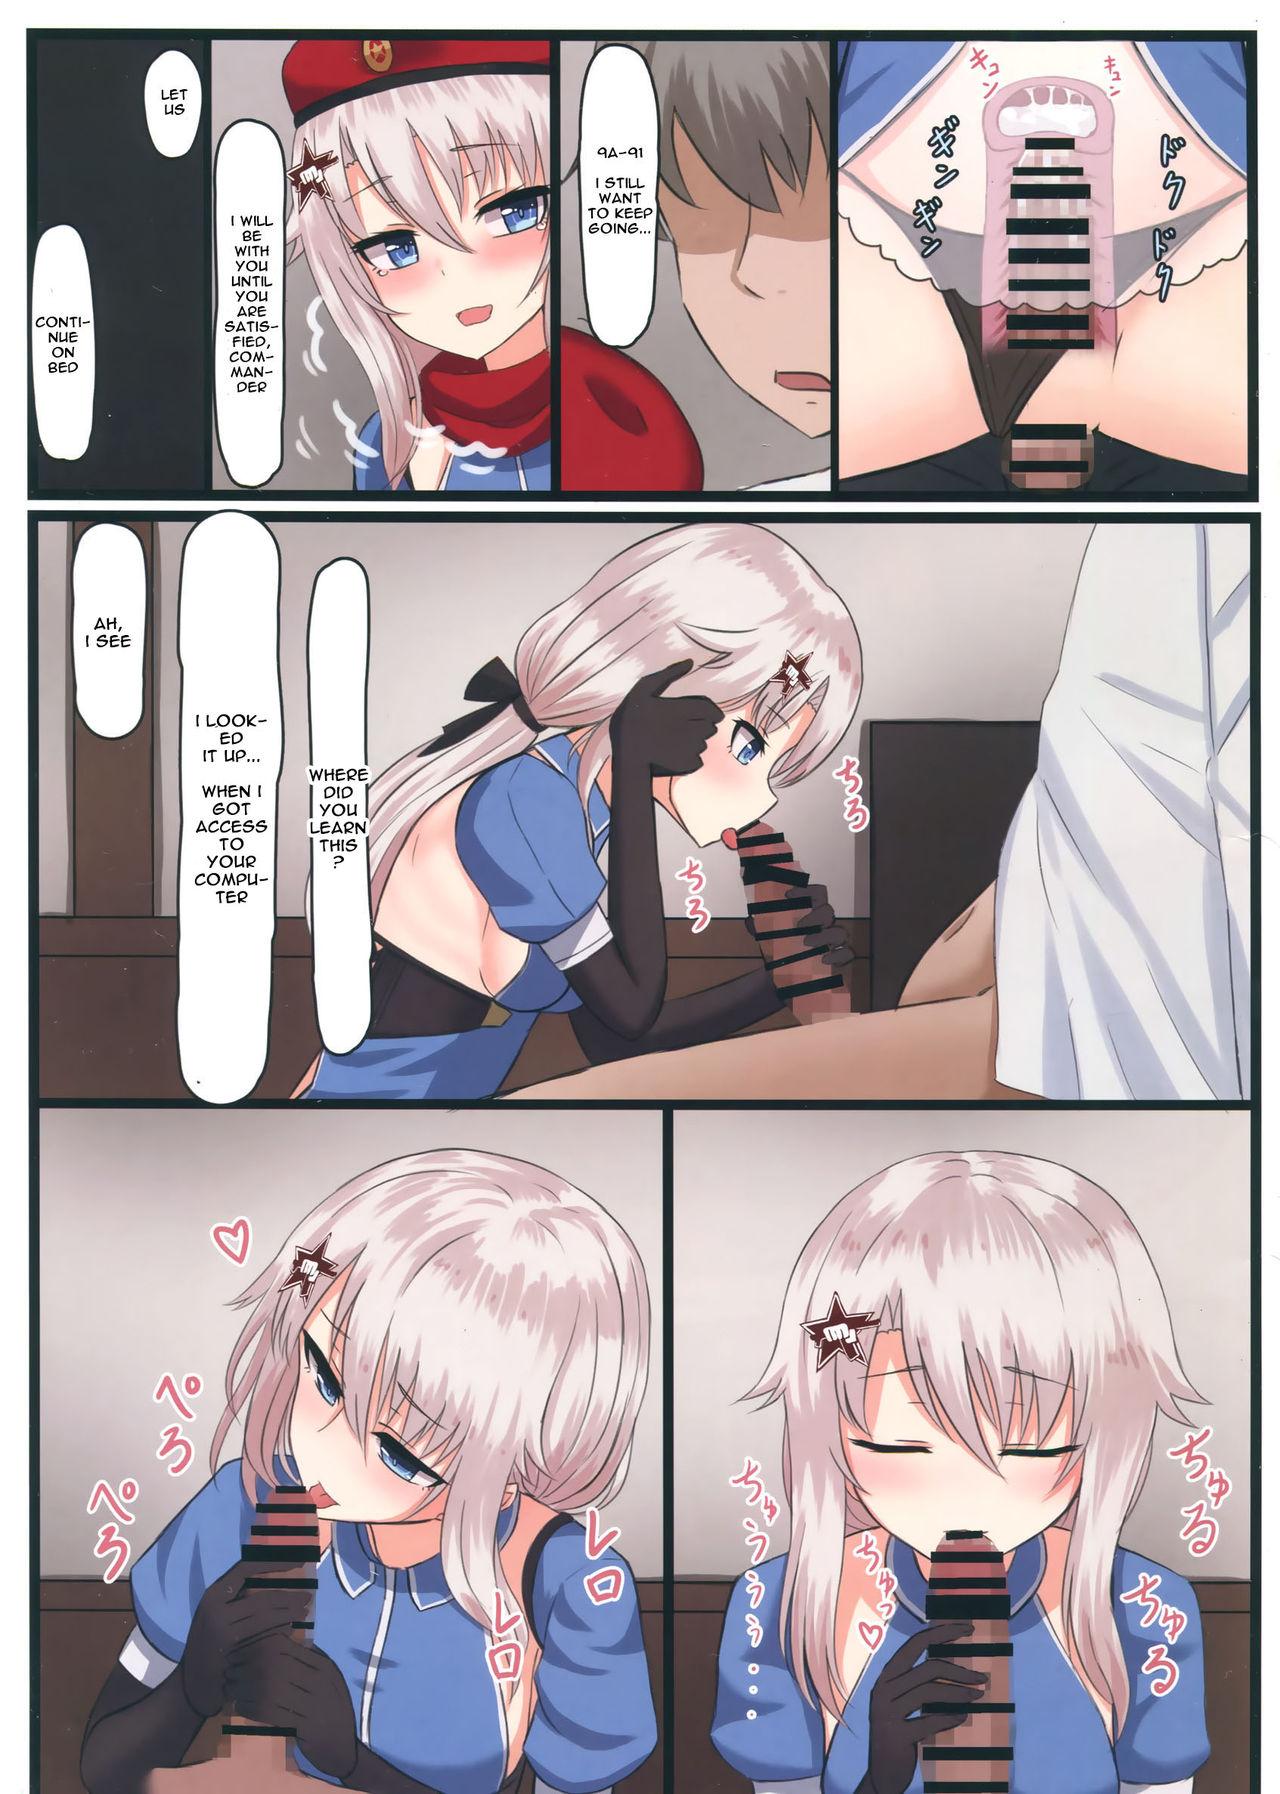 (C95) [LAB CHICKEN (Yakob)] 9A-91-chan wa Shikikan to Chomechome Shitai! | 9A-91 Wants to Do Naughty Things with Commander! (Girls' Frontline) [English] [Spicaworks] 11